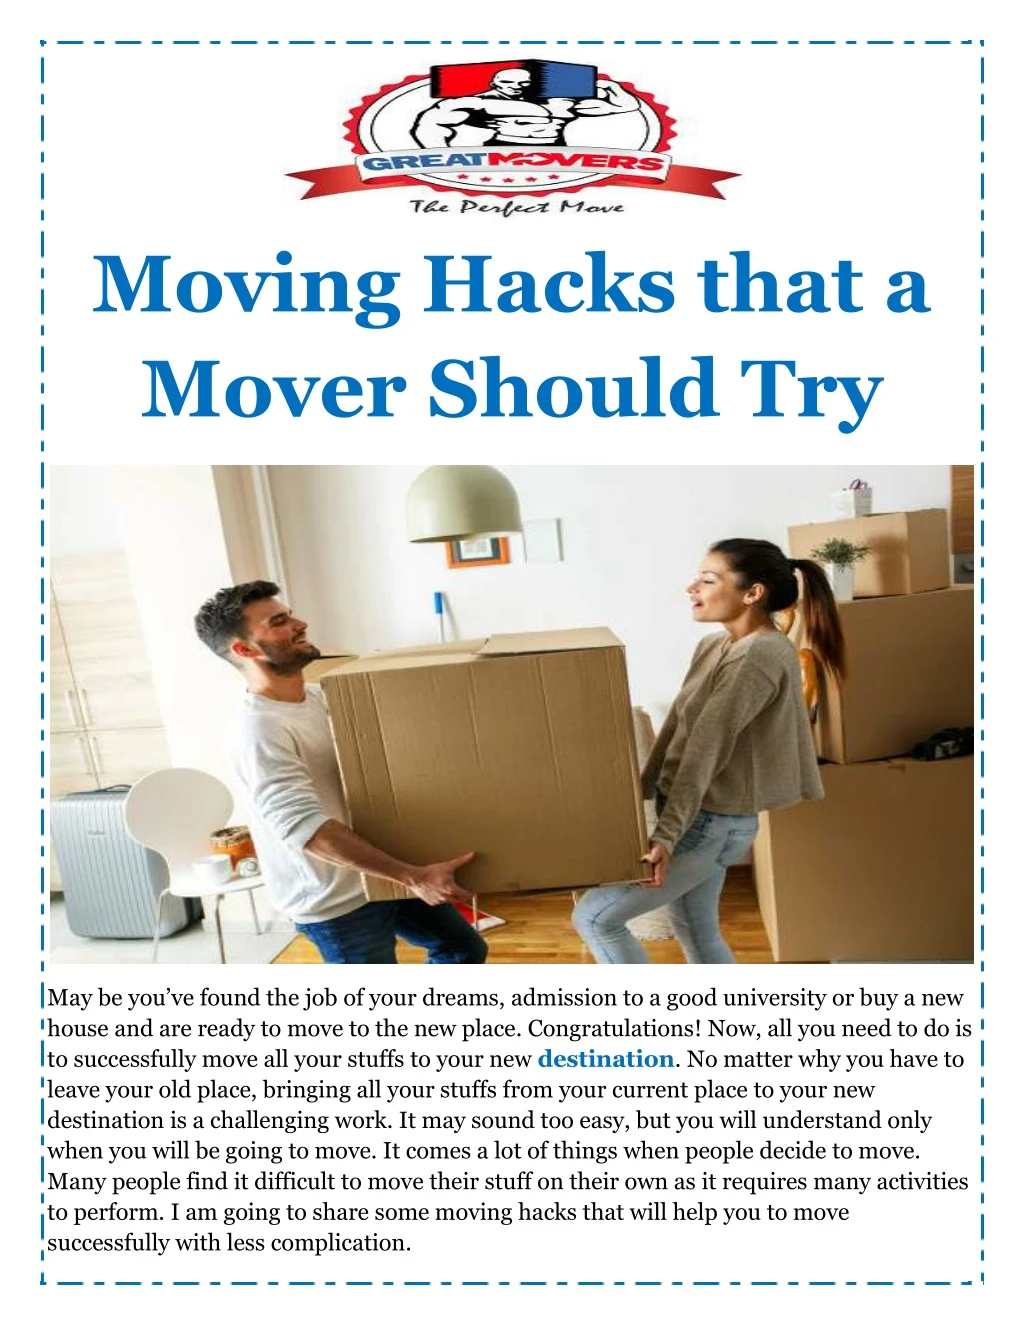 moving hacks that a mover should try